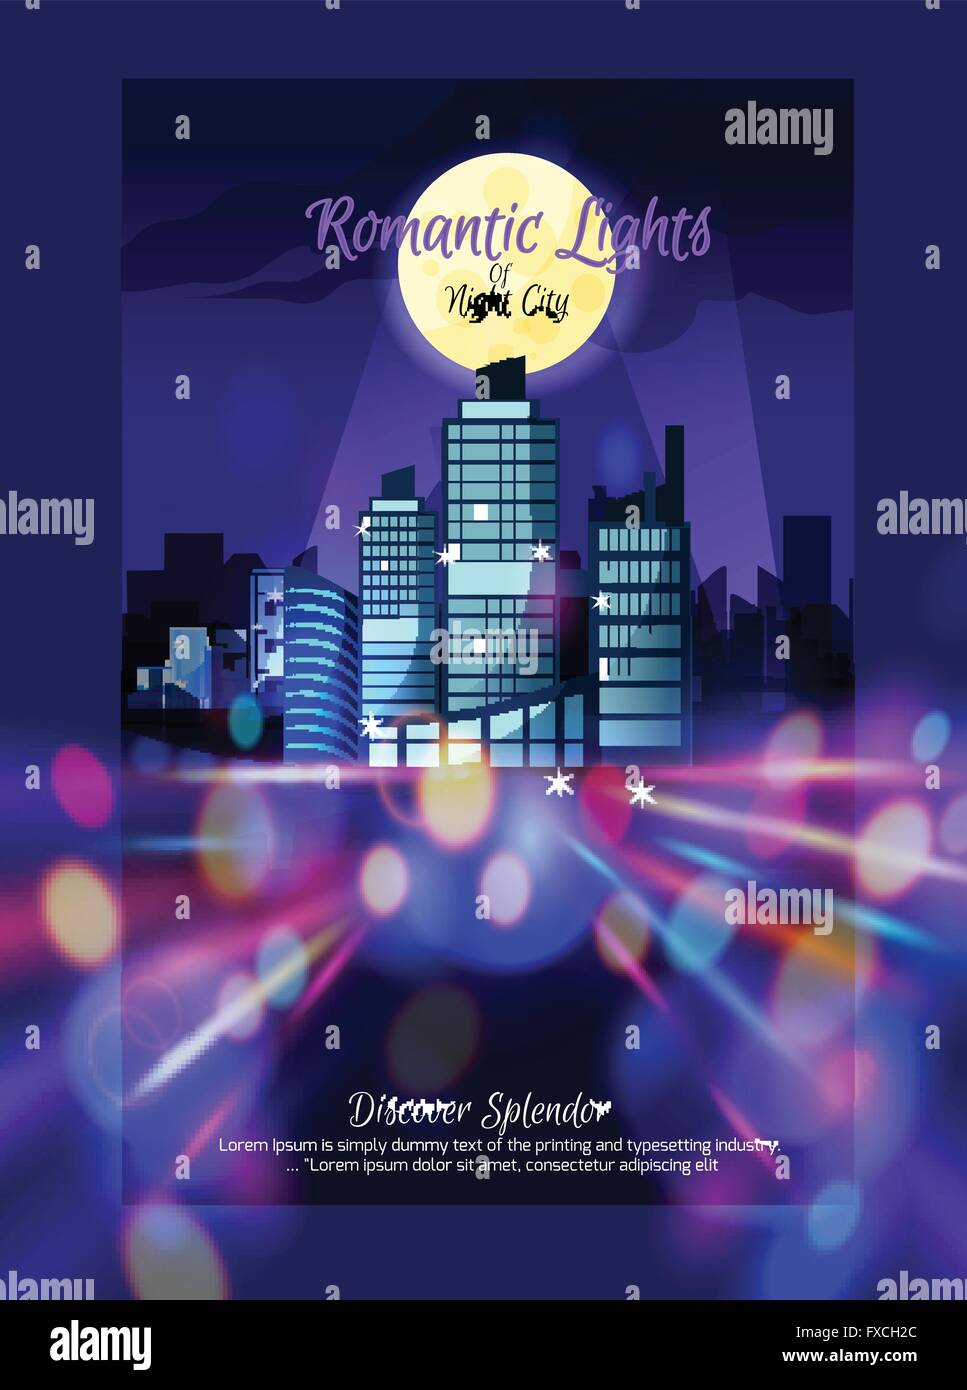 City Nightscape Poster Stock Vector